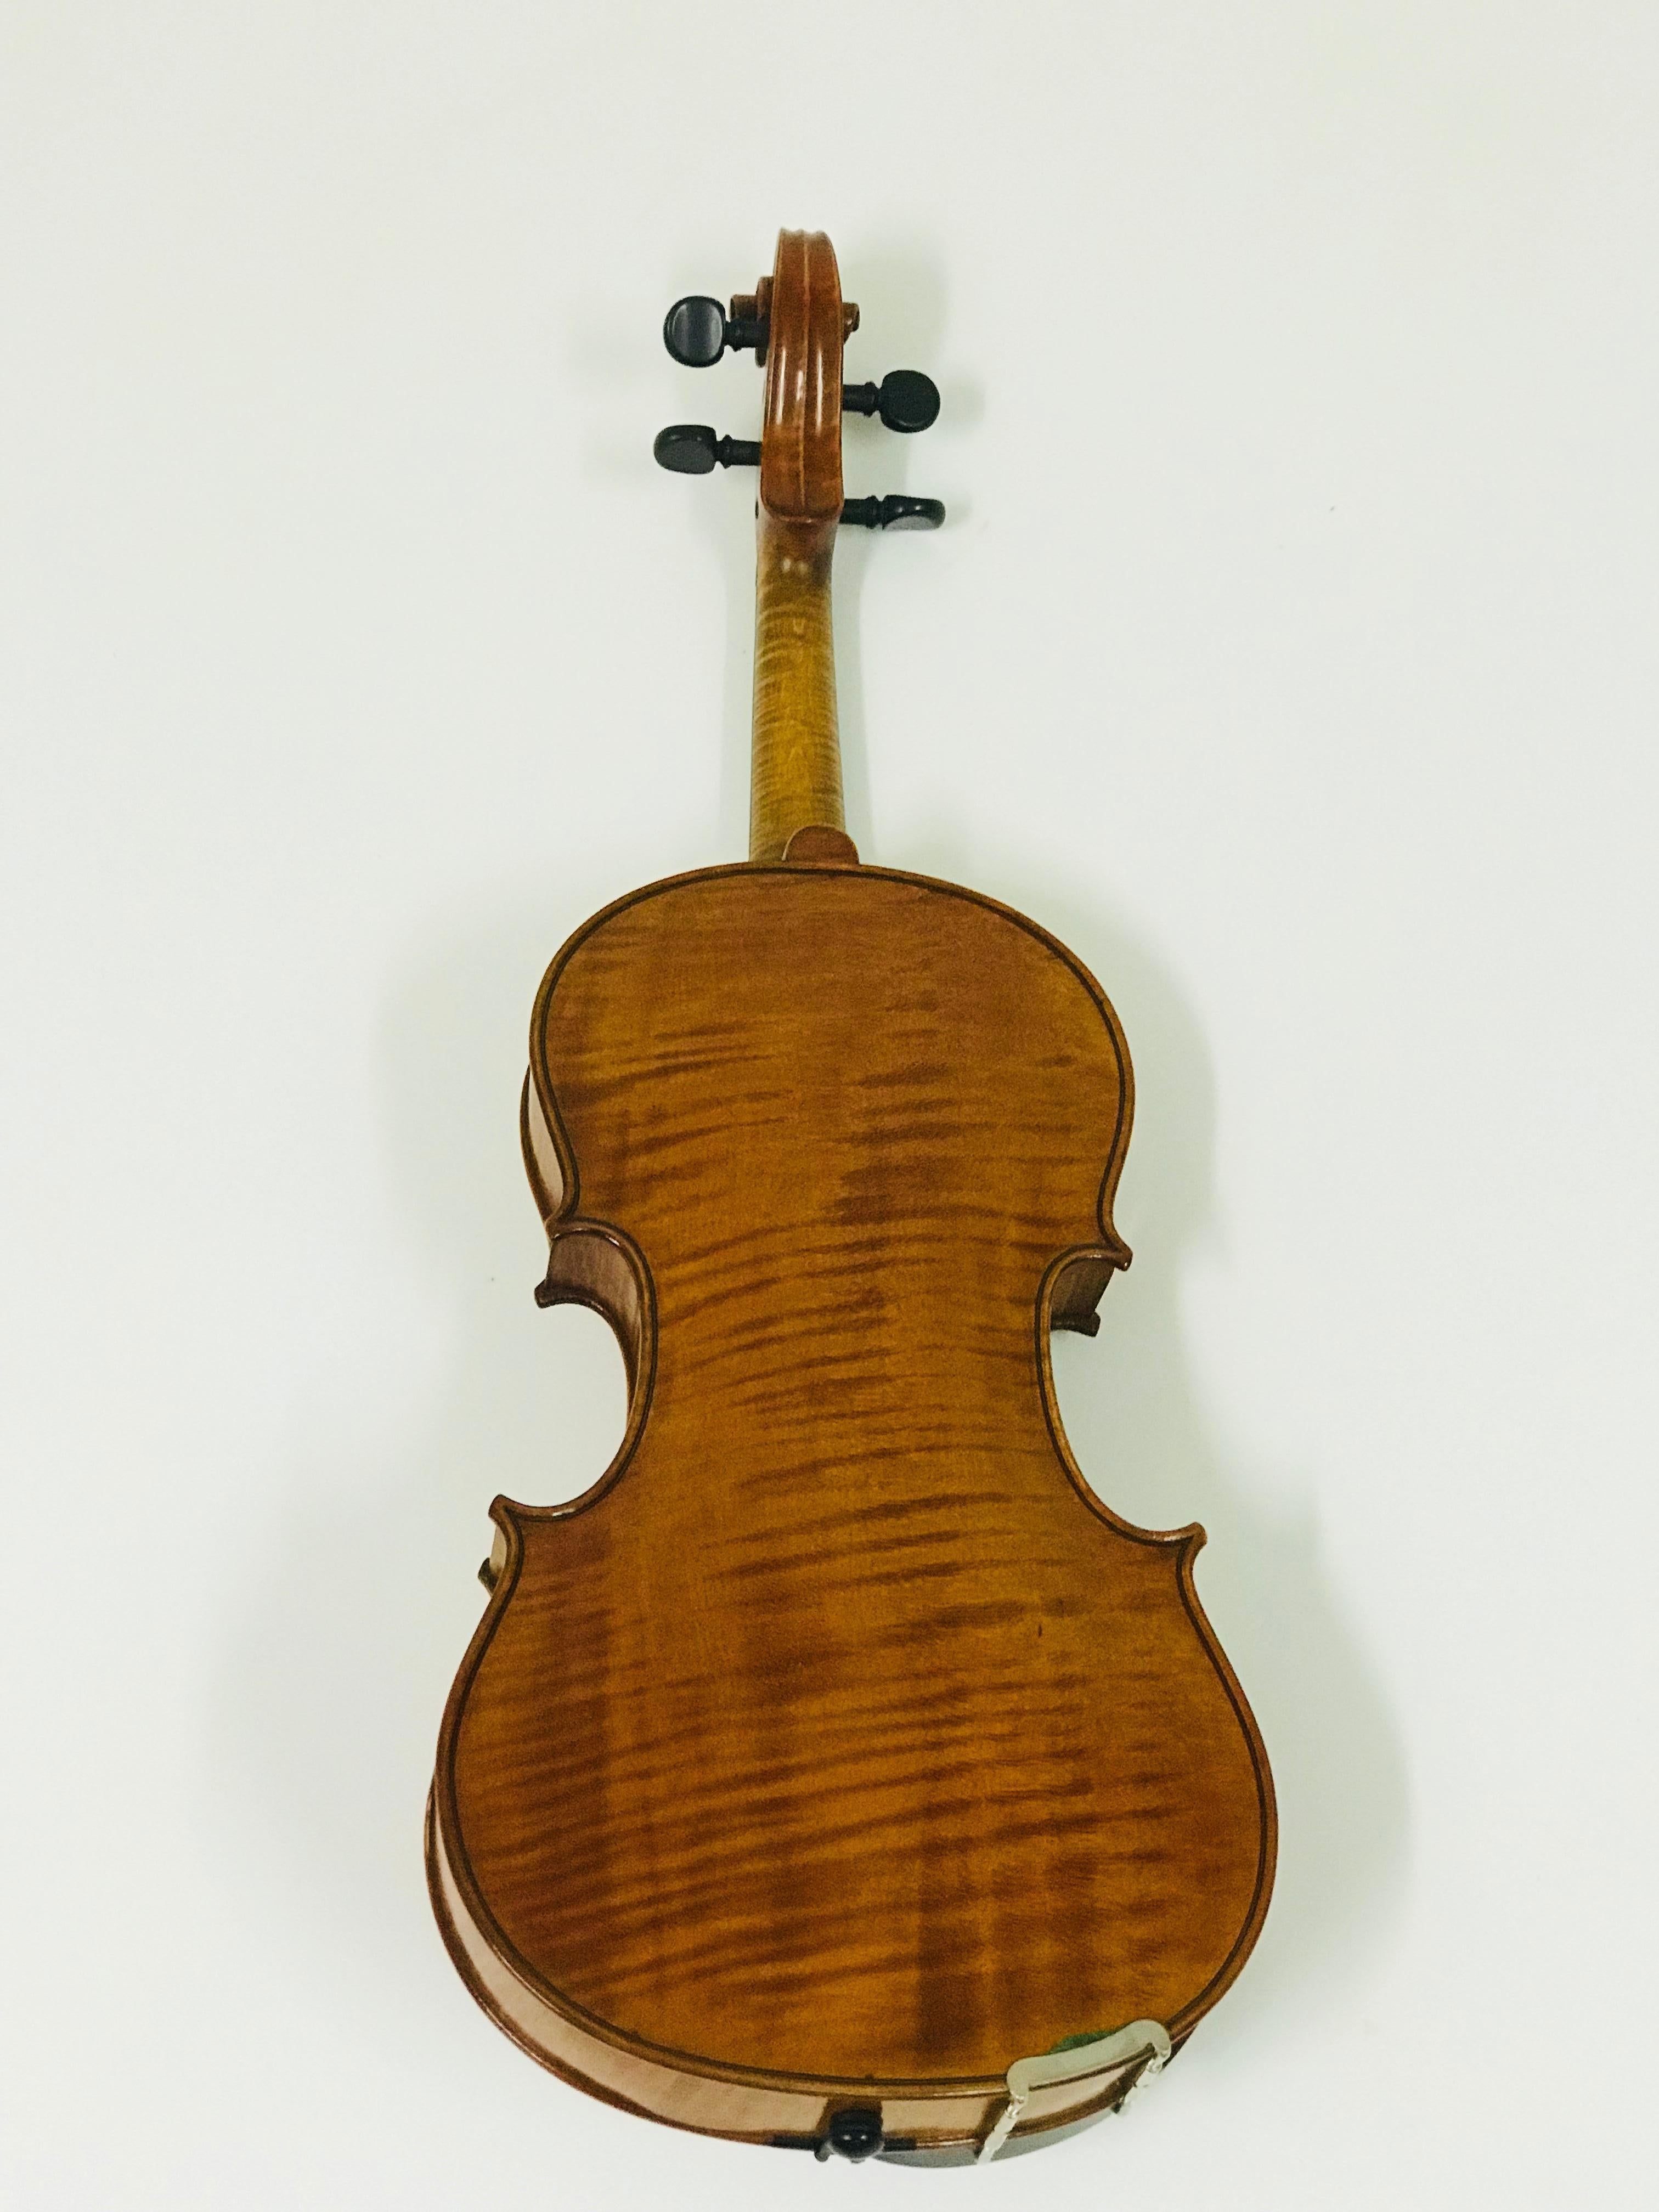 This extremely nice violin was made by Fritz Mönnig about the year 1923 in Markneukirchen in Germany. Mönnig made the violin with amazing color smooth tone. The author's violin is charakterized by excellent work. The back part is 35.6 cm.